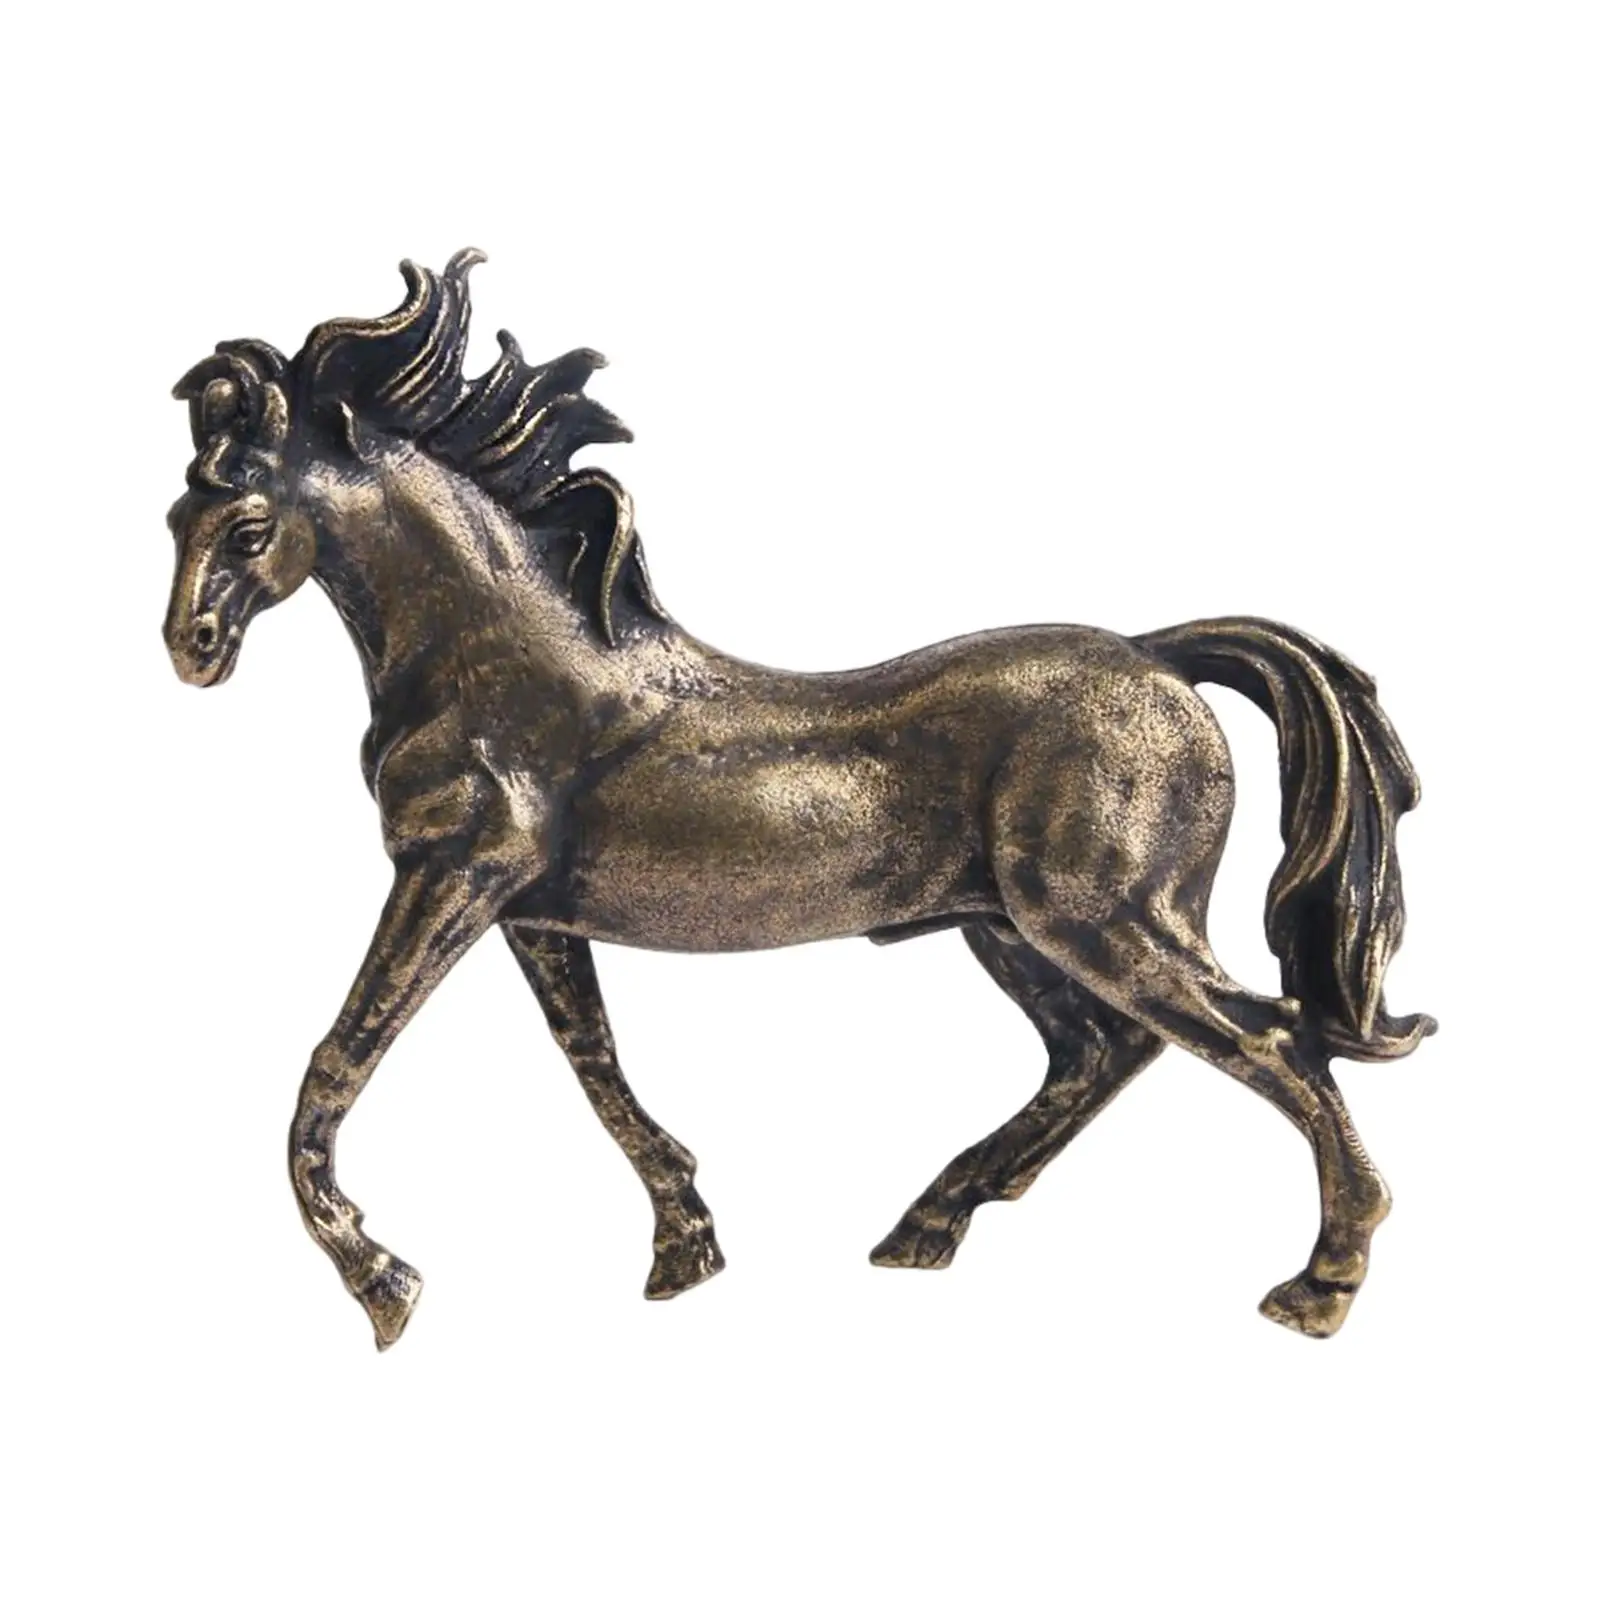 Metal Figurines Animal Sculpture Decors Horse Statues for Office Wedding Living Room